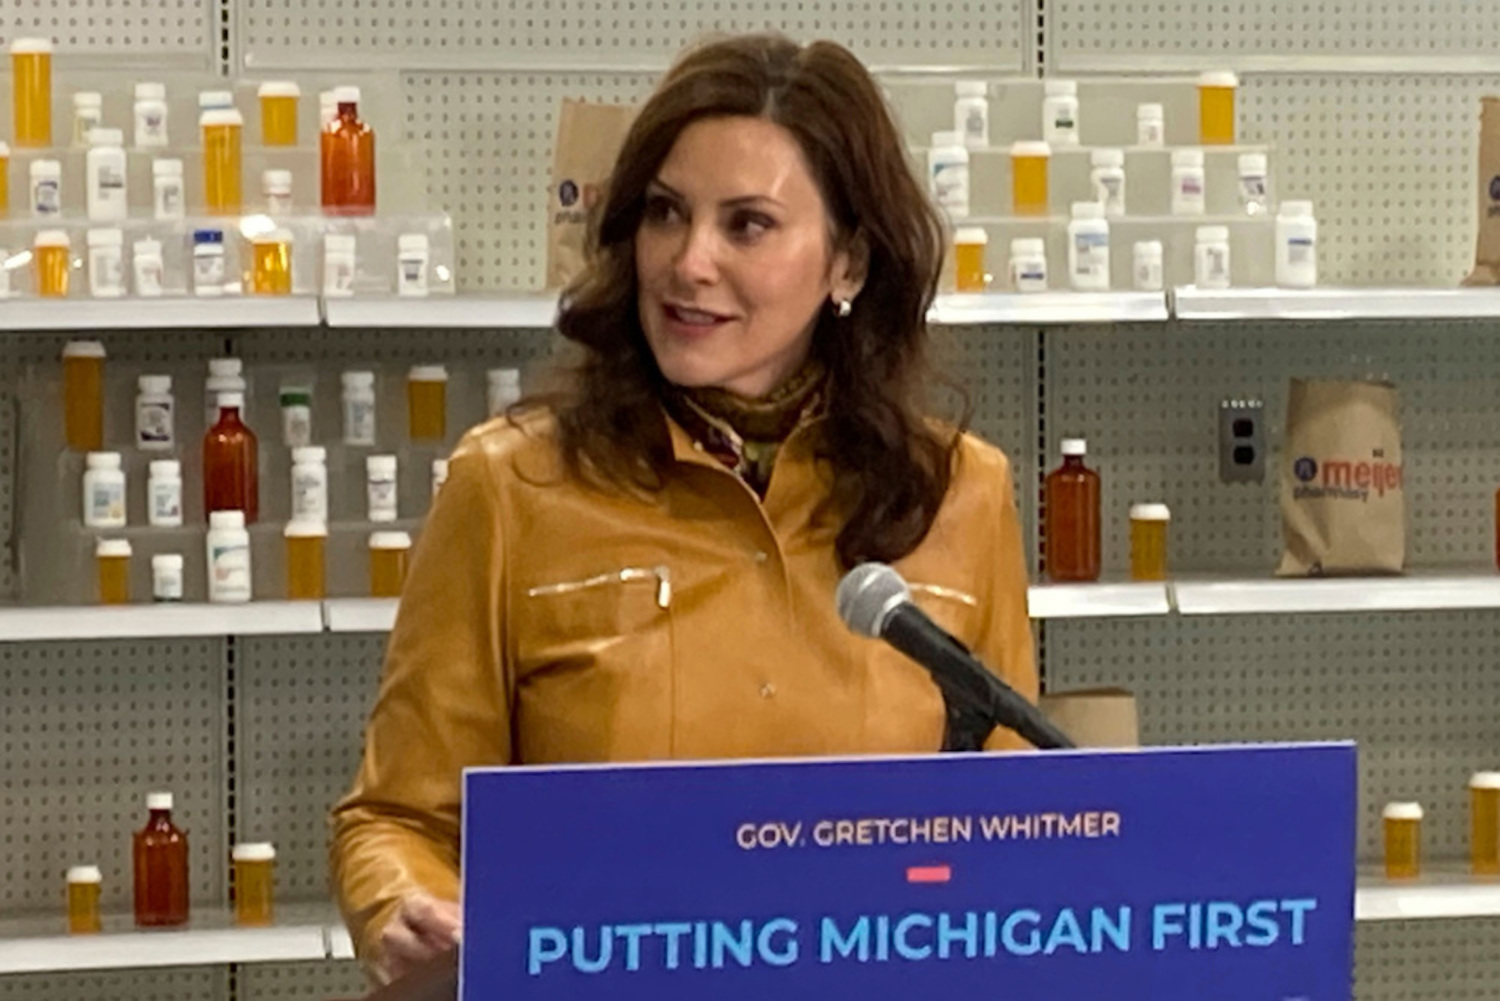 GOP Lawmakers Praise Whitmer for New Bill Helping Michiganders Get Prescriptions Faster